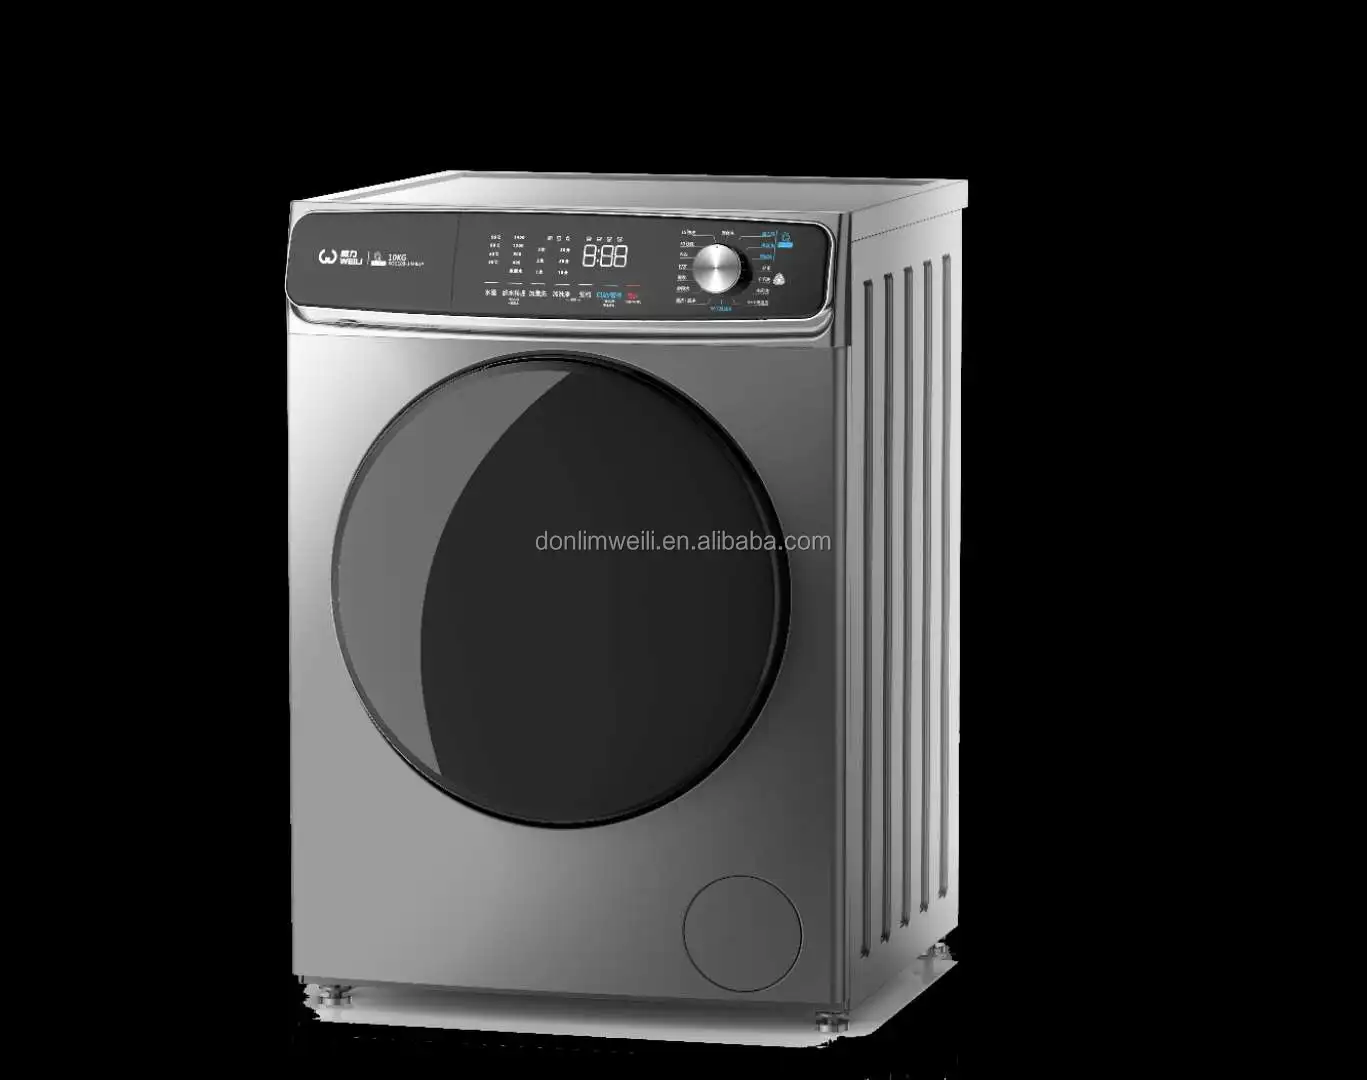 
Washing machine Fully automatic top load front load laudrary clothes washer dryer spin laundry Kg 